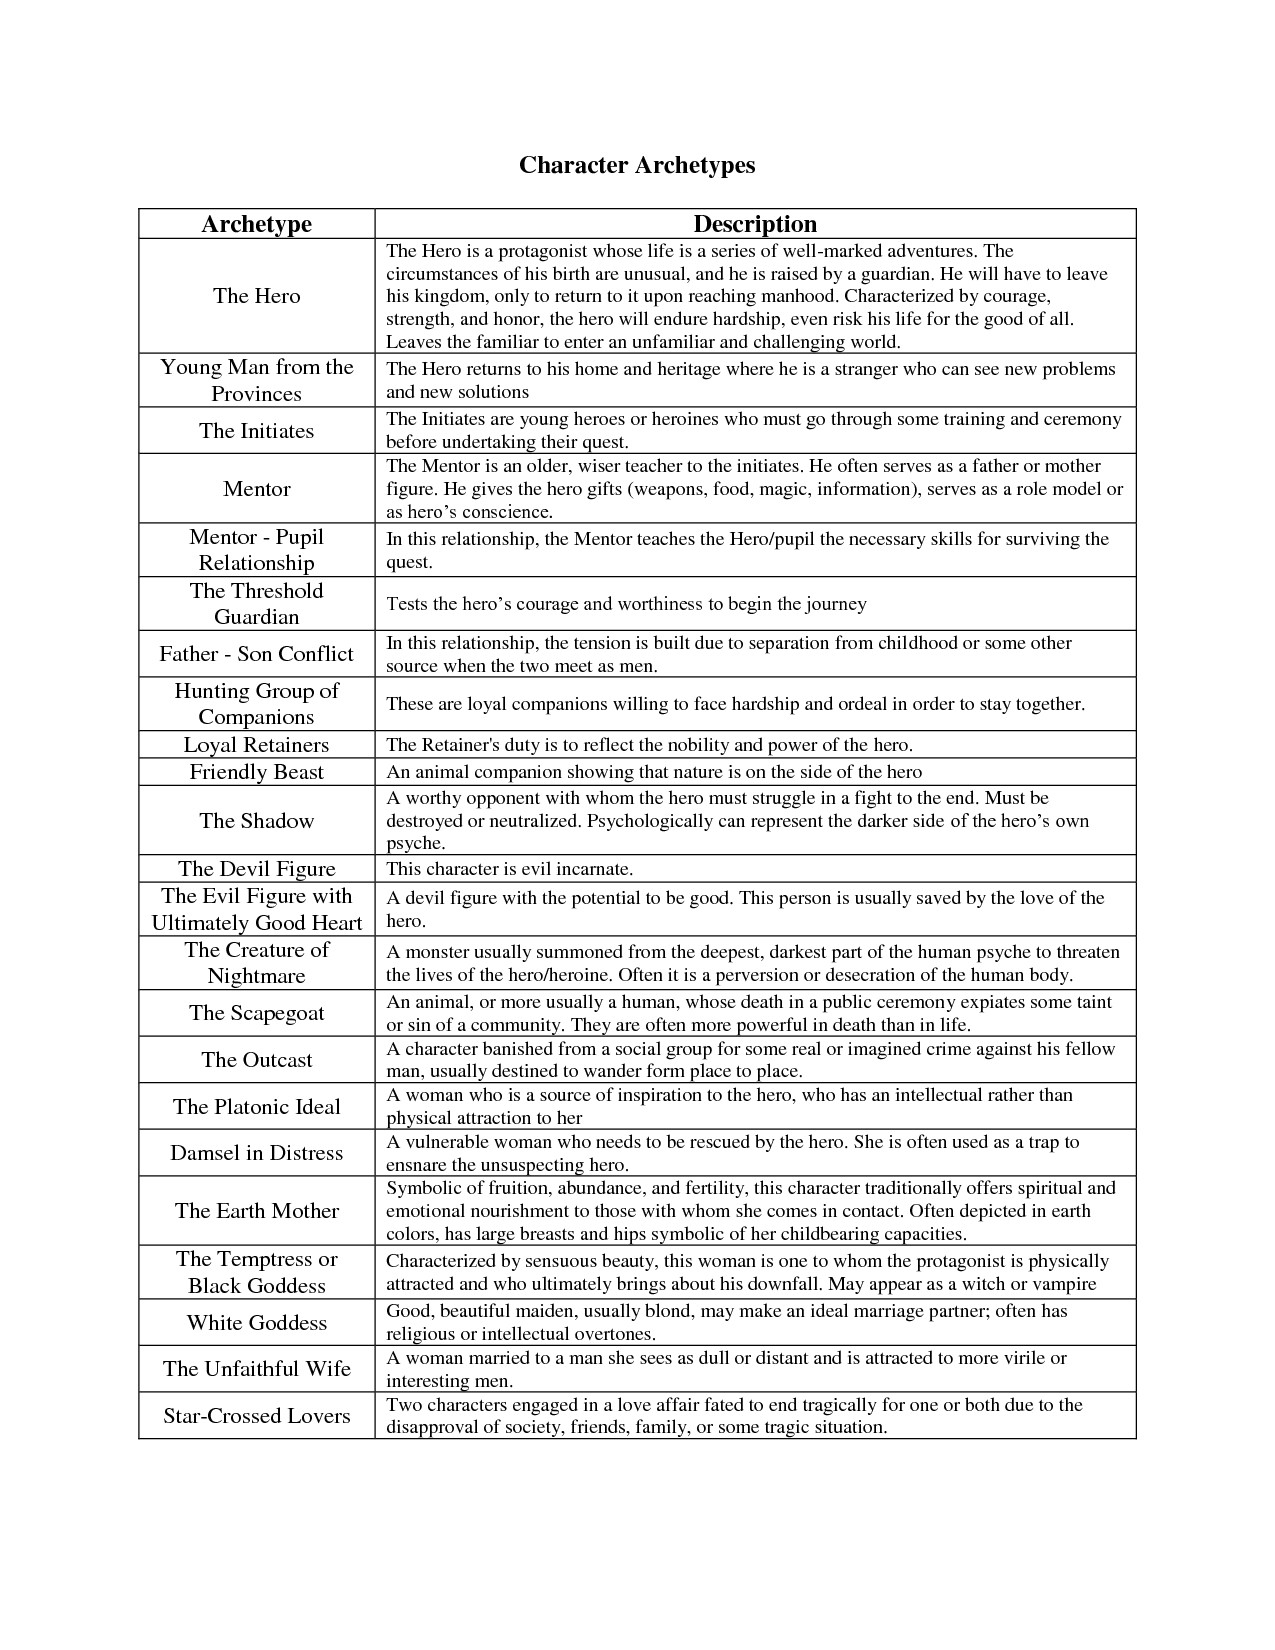 Temple Grandin Movie Worksheet Answers  Writing Worksheet With Regard To Temple Grandin Movie Worksheet Answers